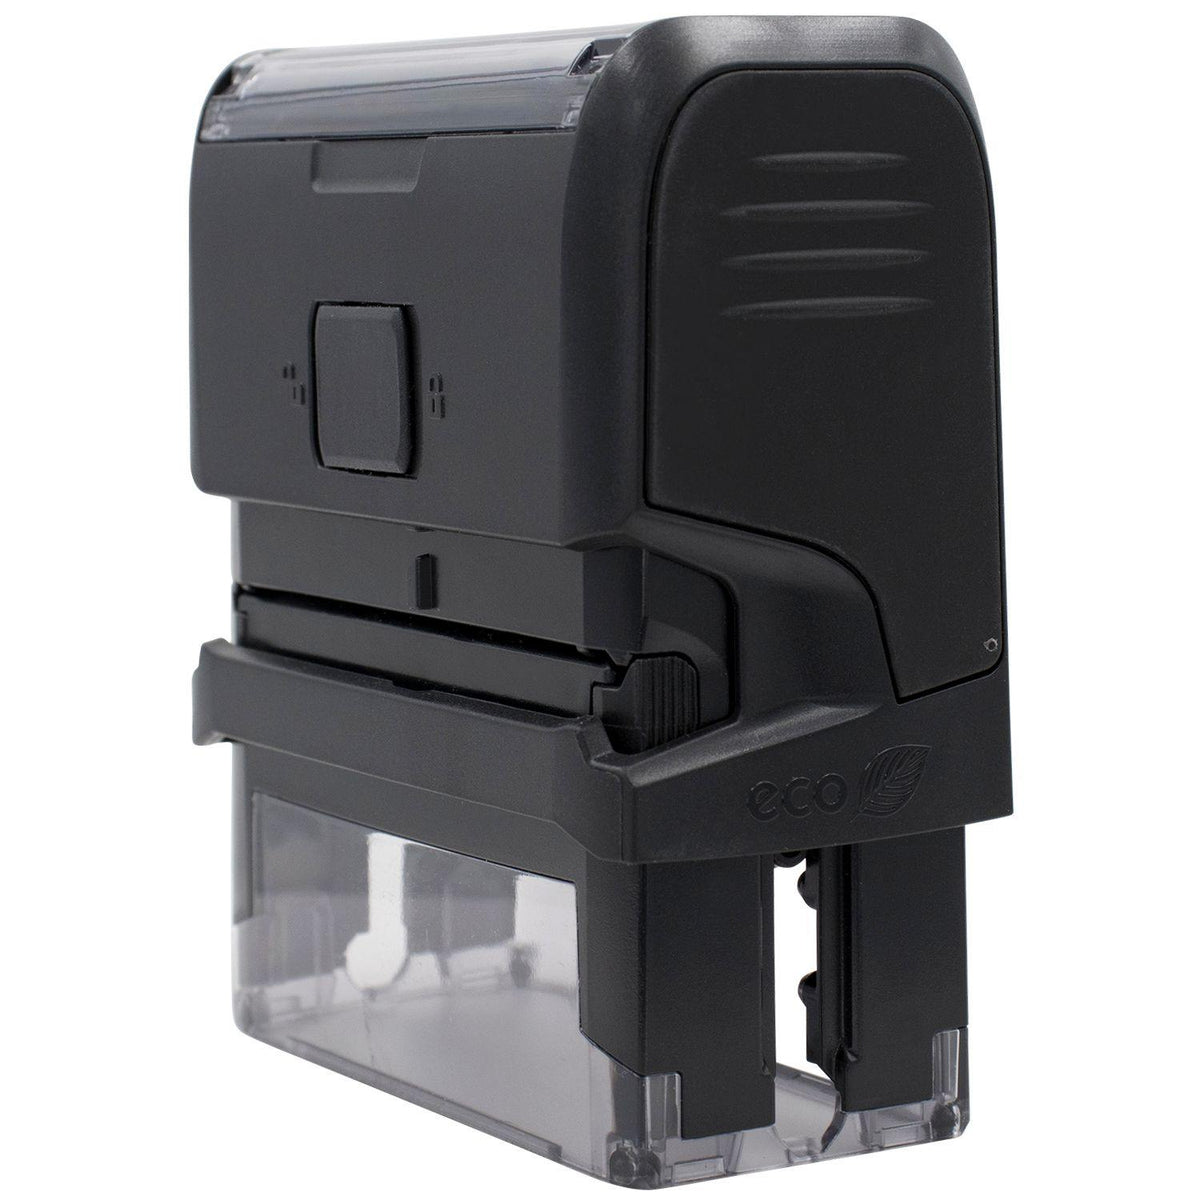 Large Self-Inking Outline Paid with Box Stamp - Engineer Seal Stamps - Brand_Trodat, Impression Size_Large, Stamp Type_Self-Inking Stamp, Type of Use_Business, Type of Use_Finance, Type of Use_General